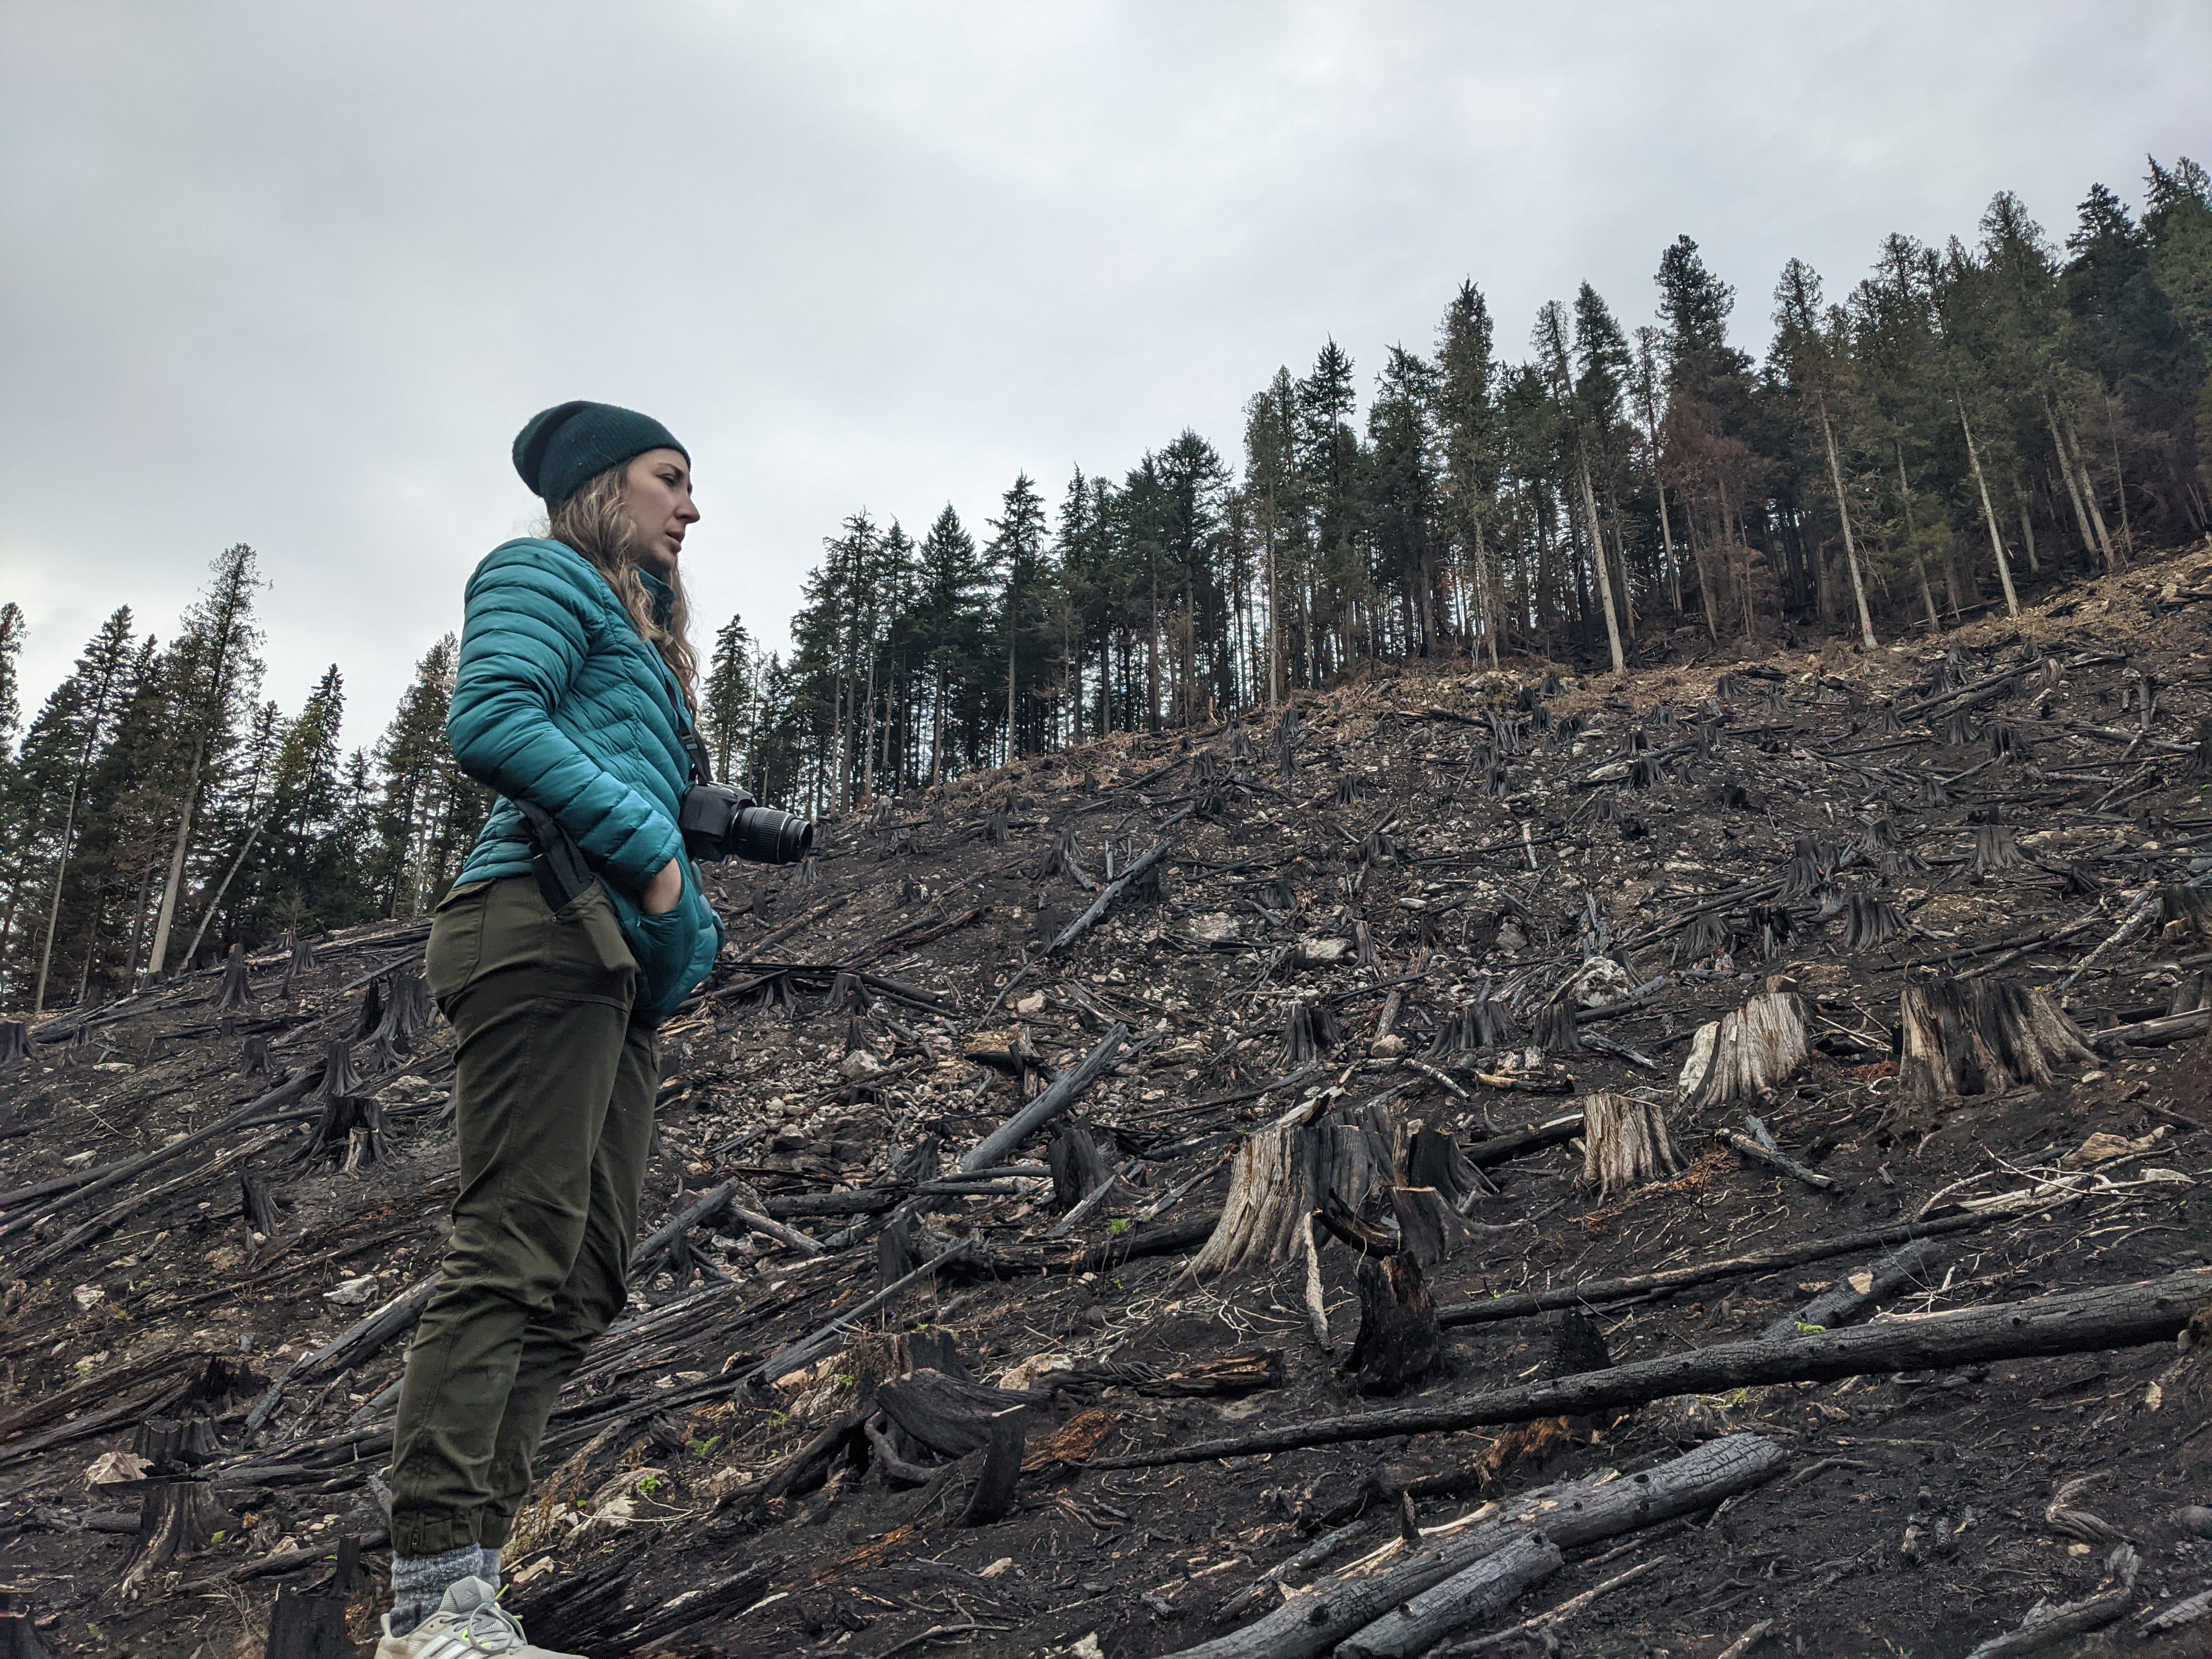 Charlotte Dawe visits a slash and burn old-growth logging site next to core caribou habitat in the Bigmouth Valley, North of Revelstoke, B.C. Photo credit: Alex Tsui, Wilderness Committee